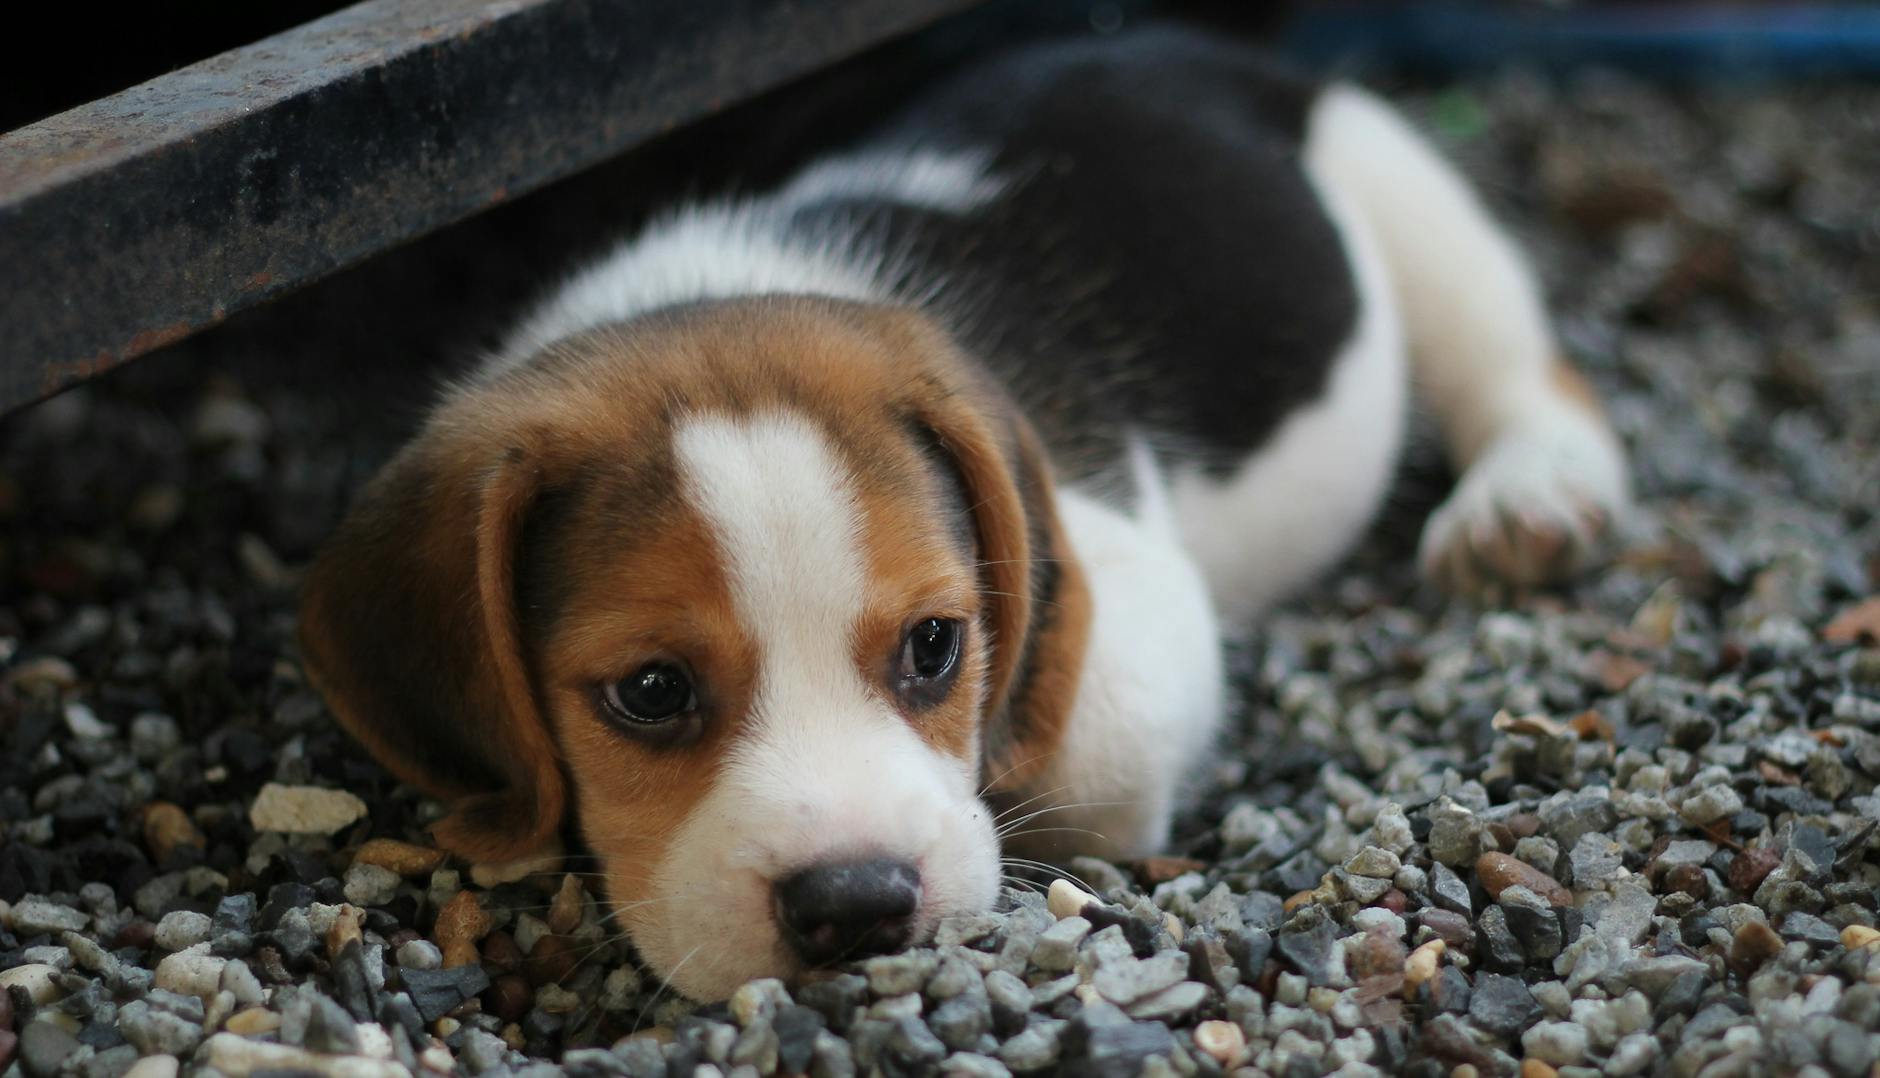 Picture: https://www.pexels.com/photo/animal-beagle-canine-close-up-460823/